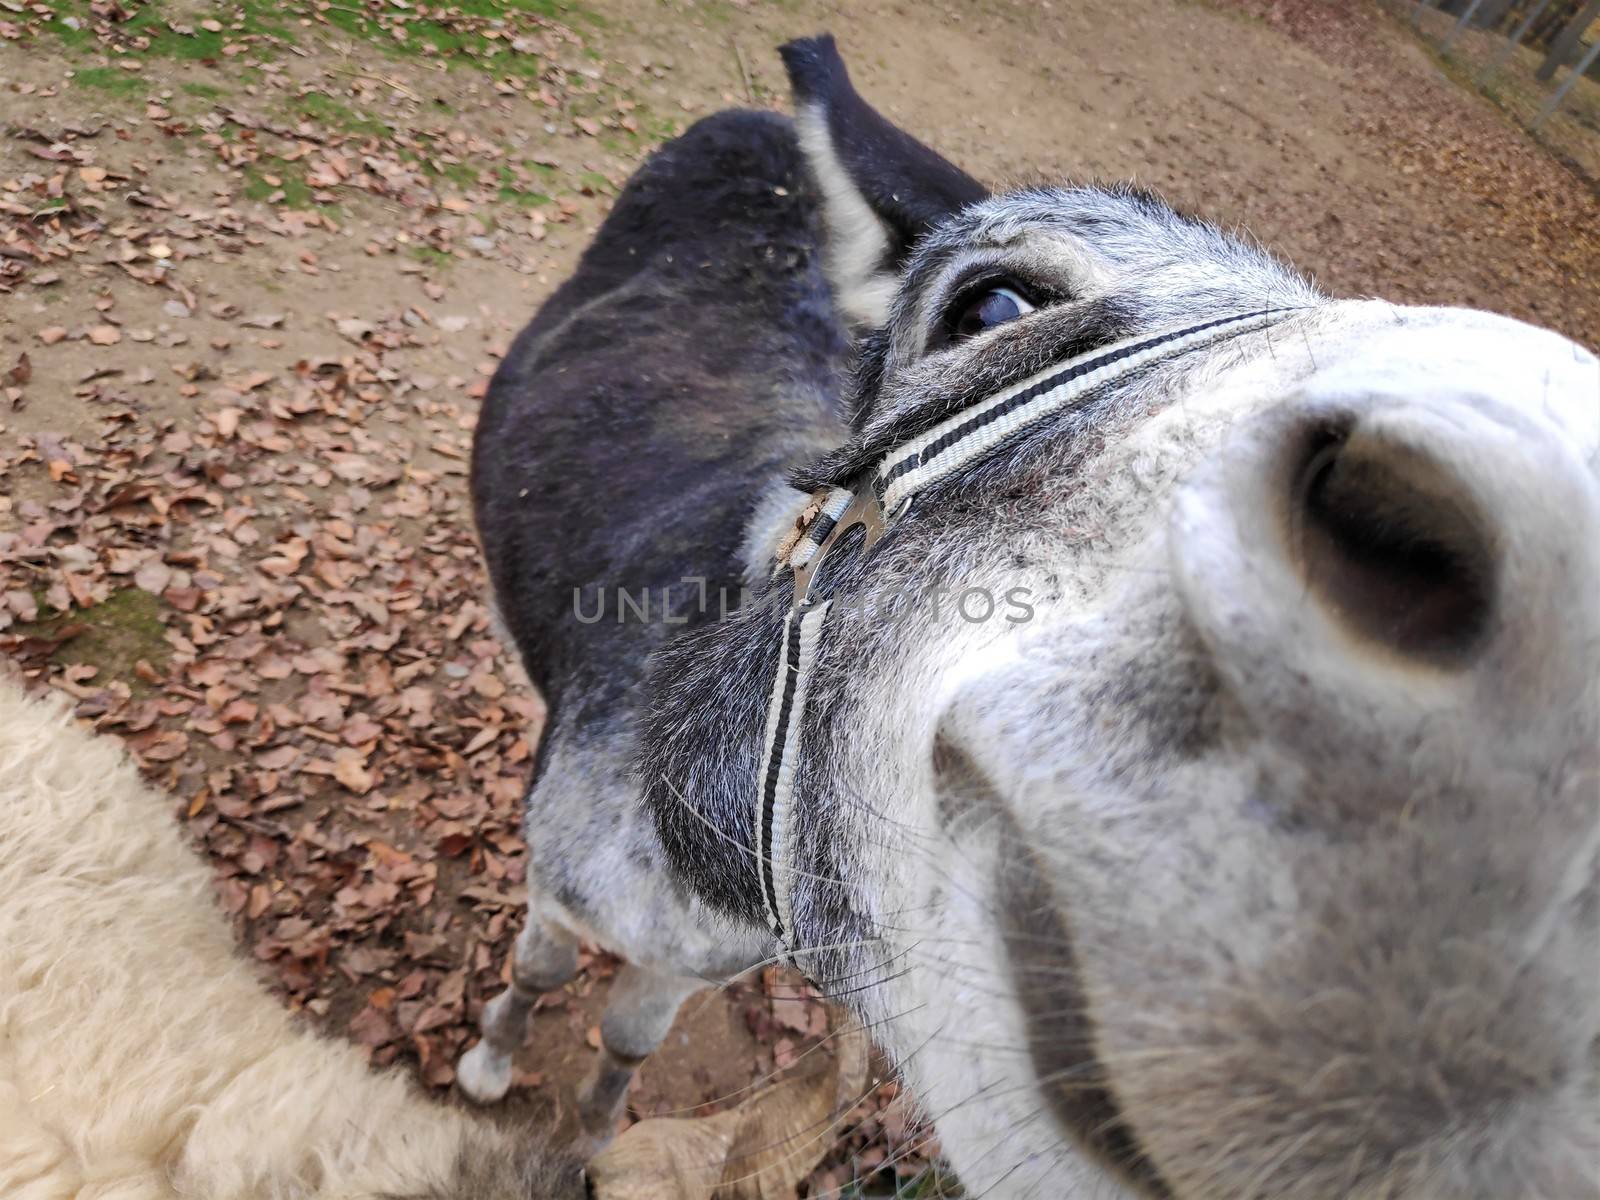 Donkey coming very close to the camera on farm by pisces2386